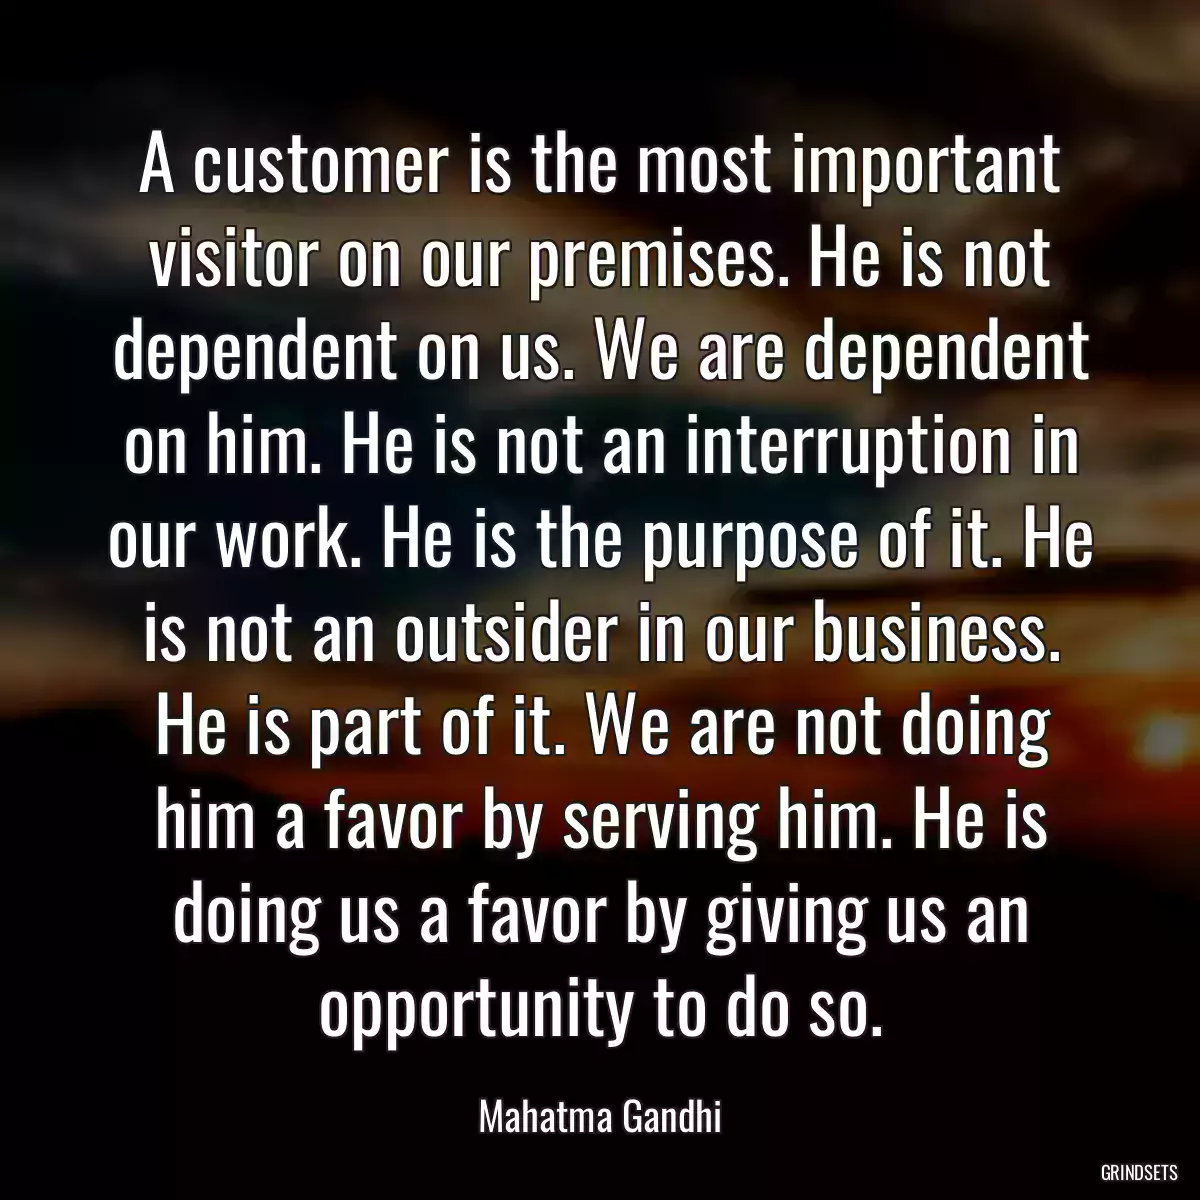 A customer is the most important visitor on our premises. He is not dependent on us. We are dependent on him. He is not an interruption in our work. He is the purpose of it. He is not an outsider in our business. He is part of it. We are not doing him a favor by serving him. He is doing us a favor by giving us an opportunity to do so.